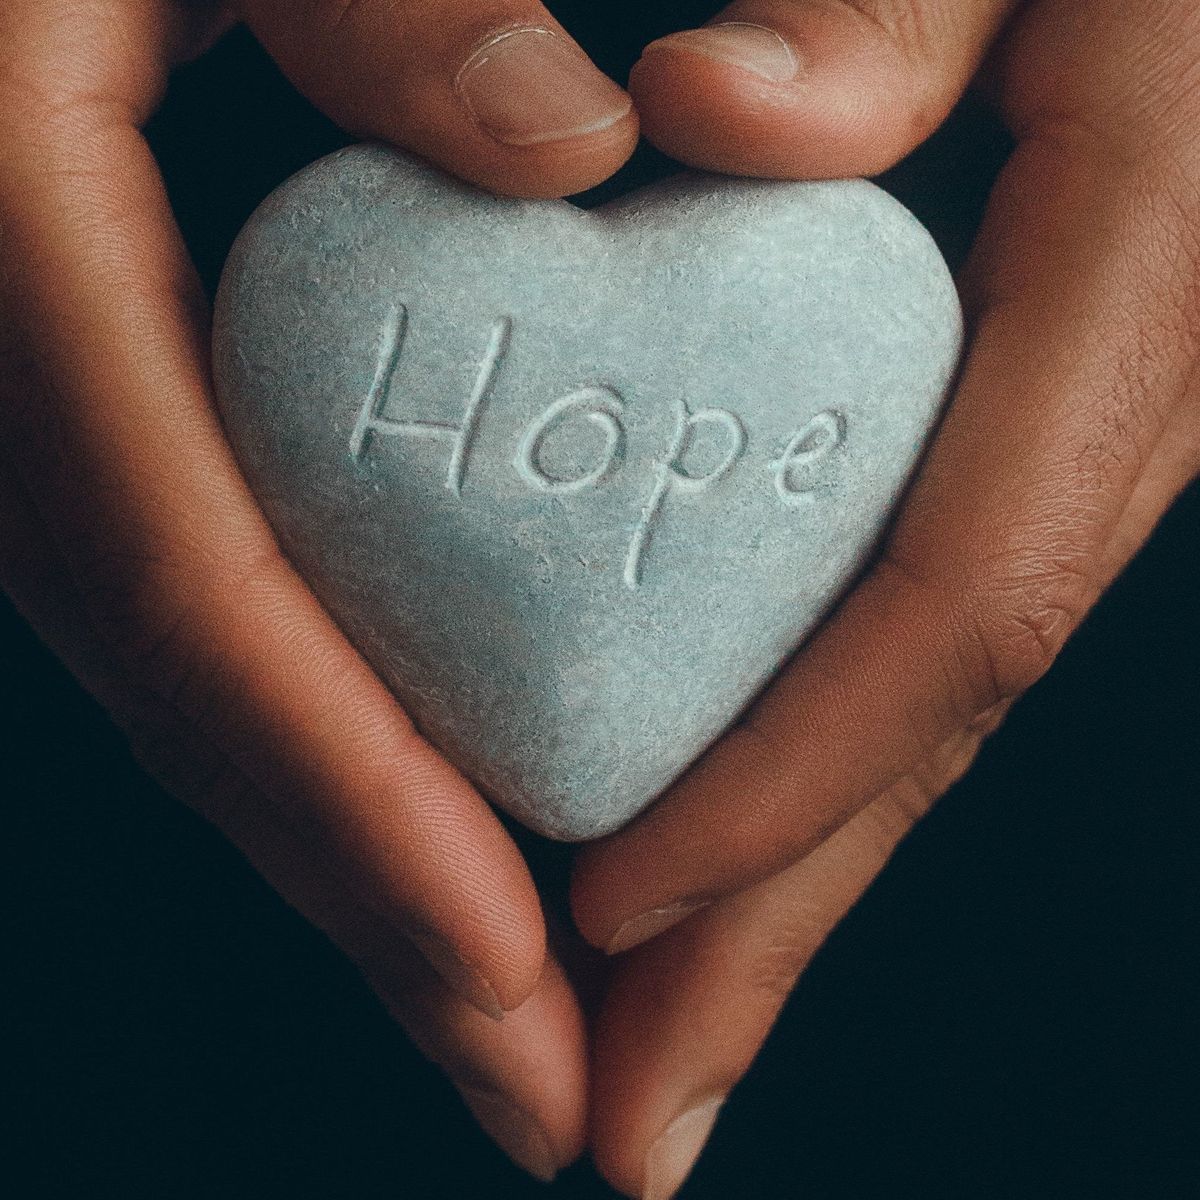 Hope fills our heart